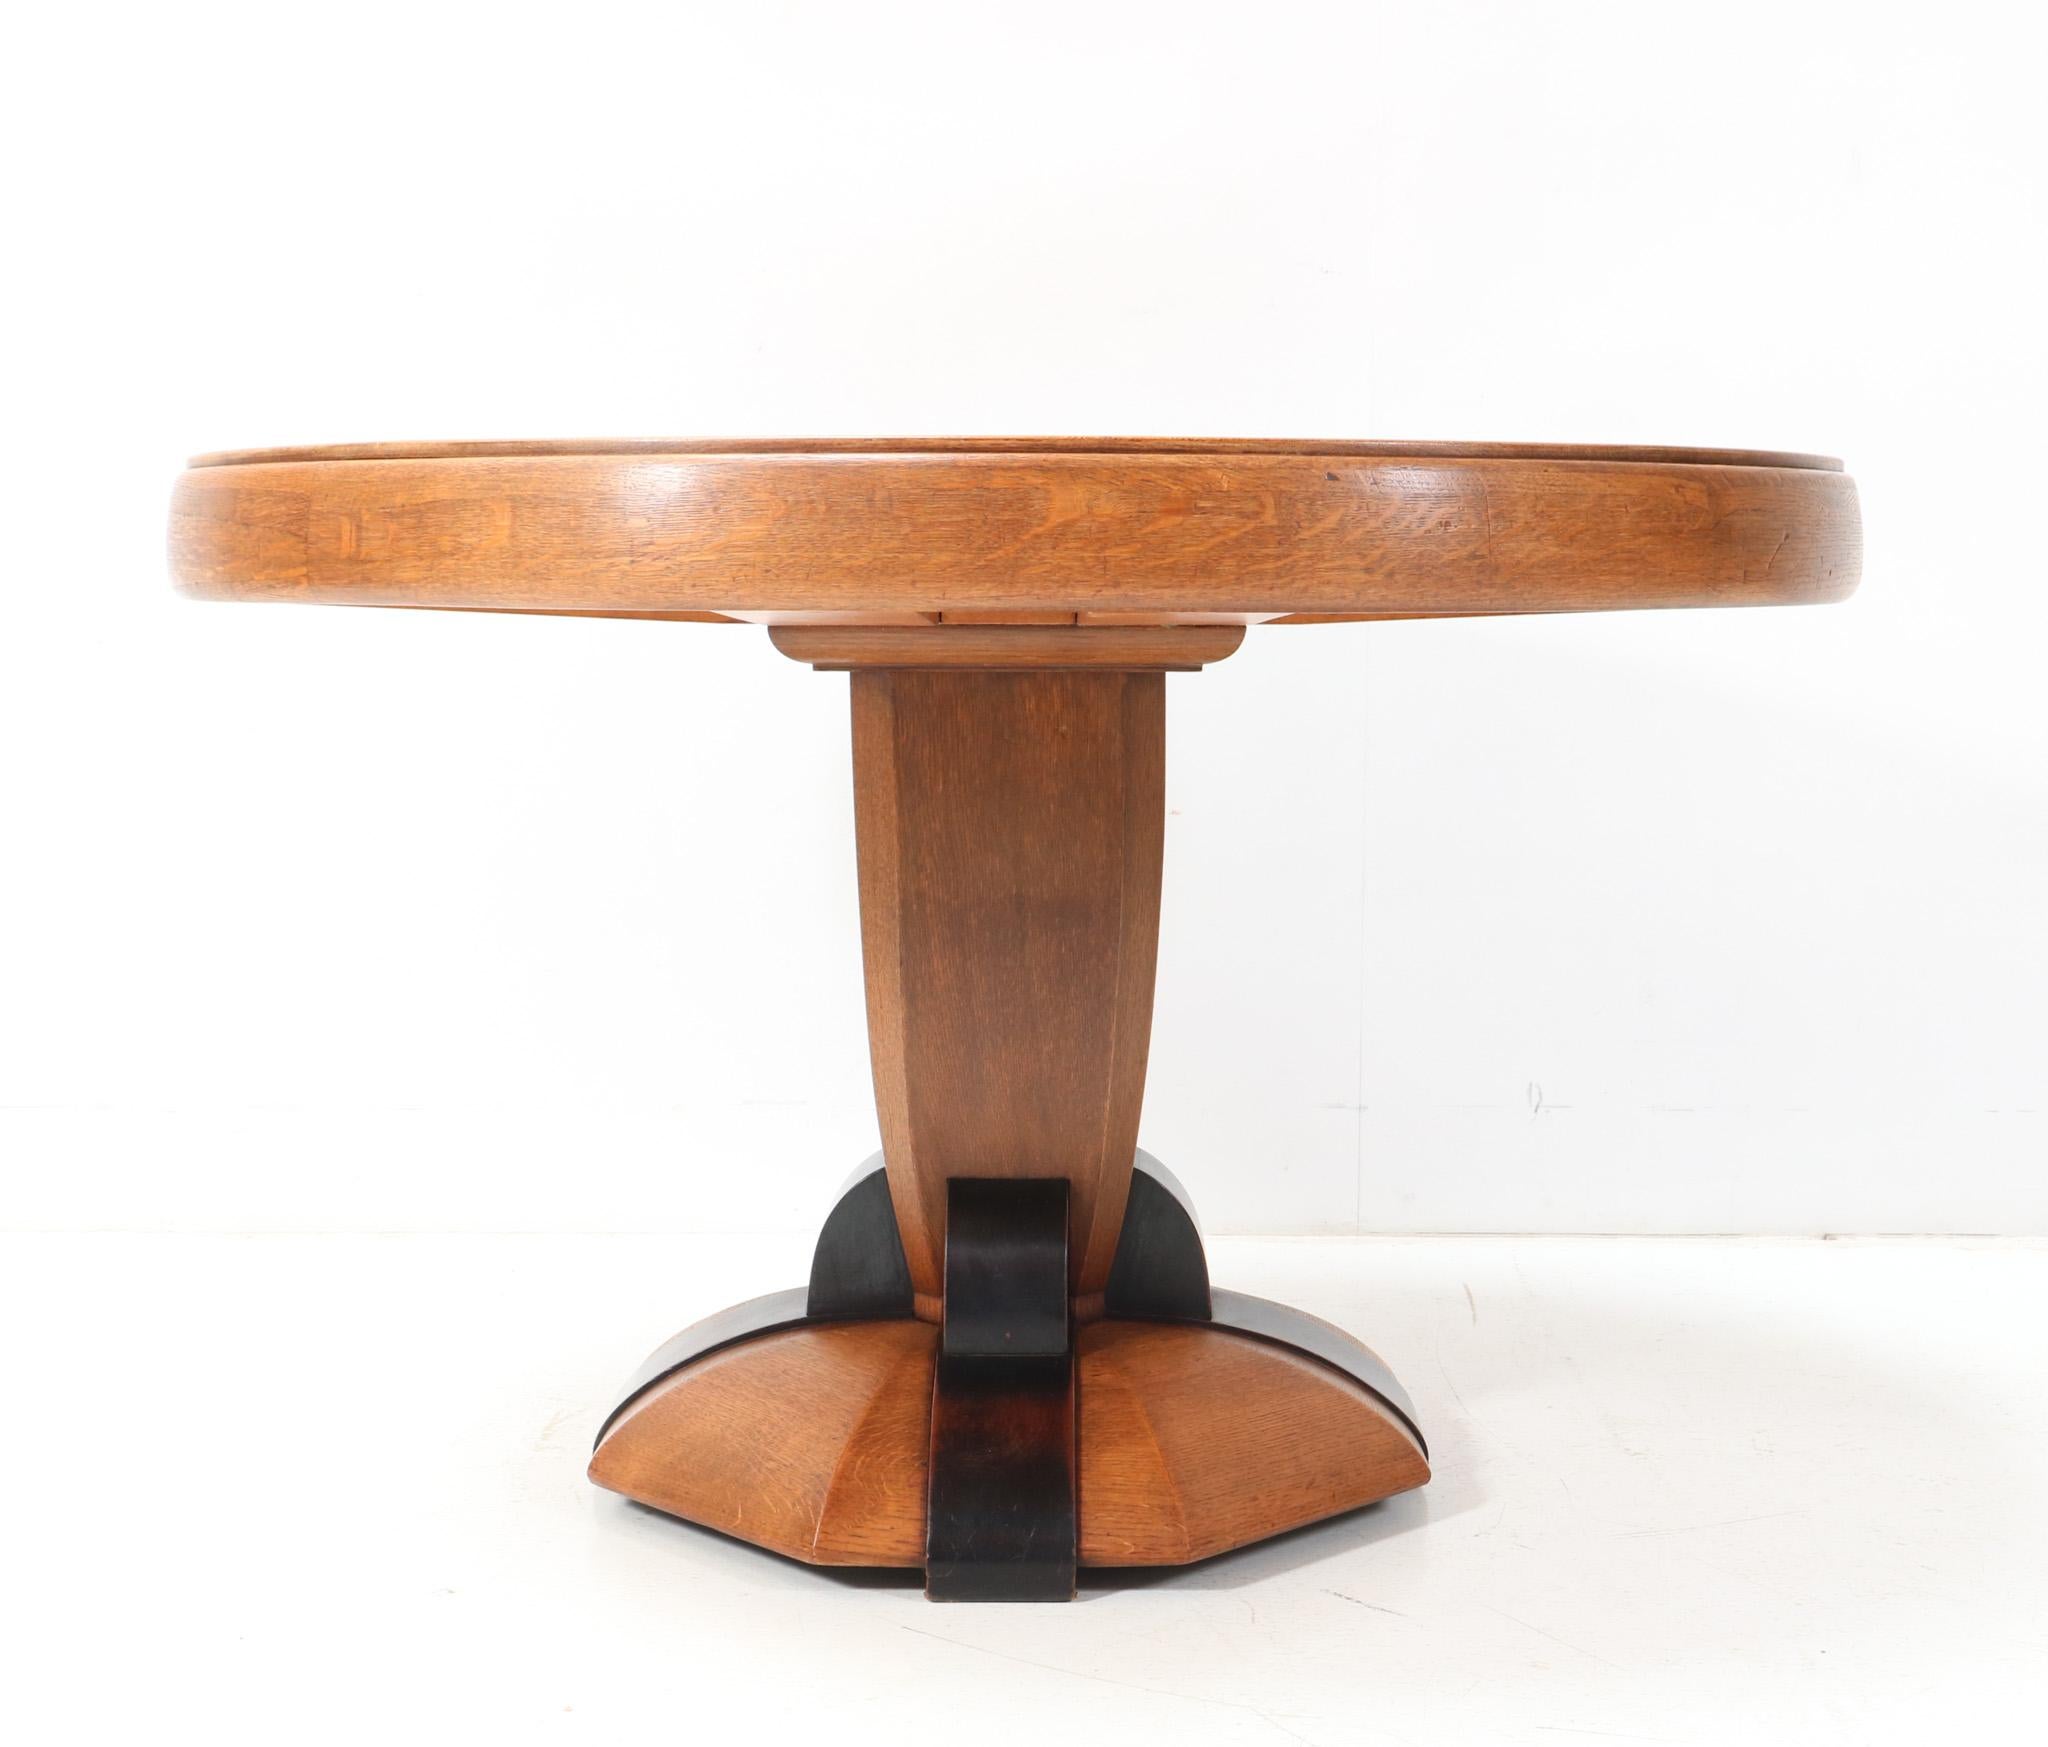 Dutch  Art Deco Amsterdamse School Oak Dining Room Table by Paul Bromberg for Pander For Sale